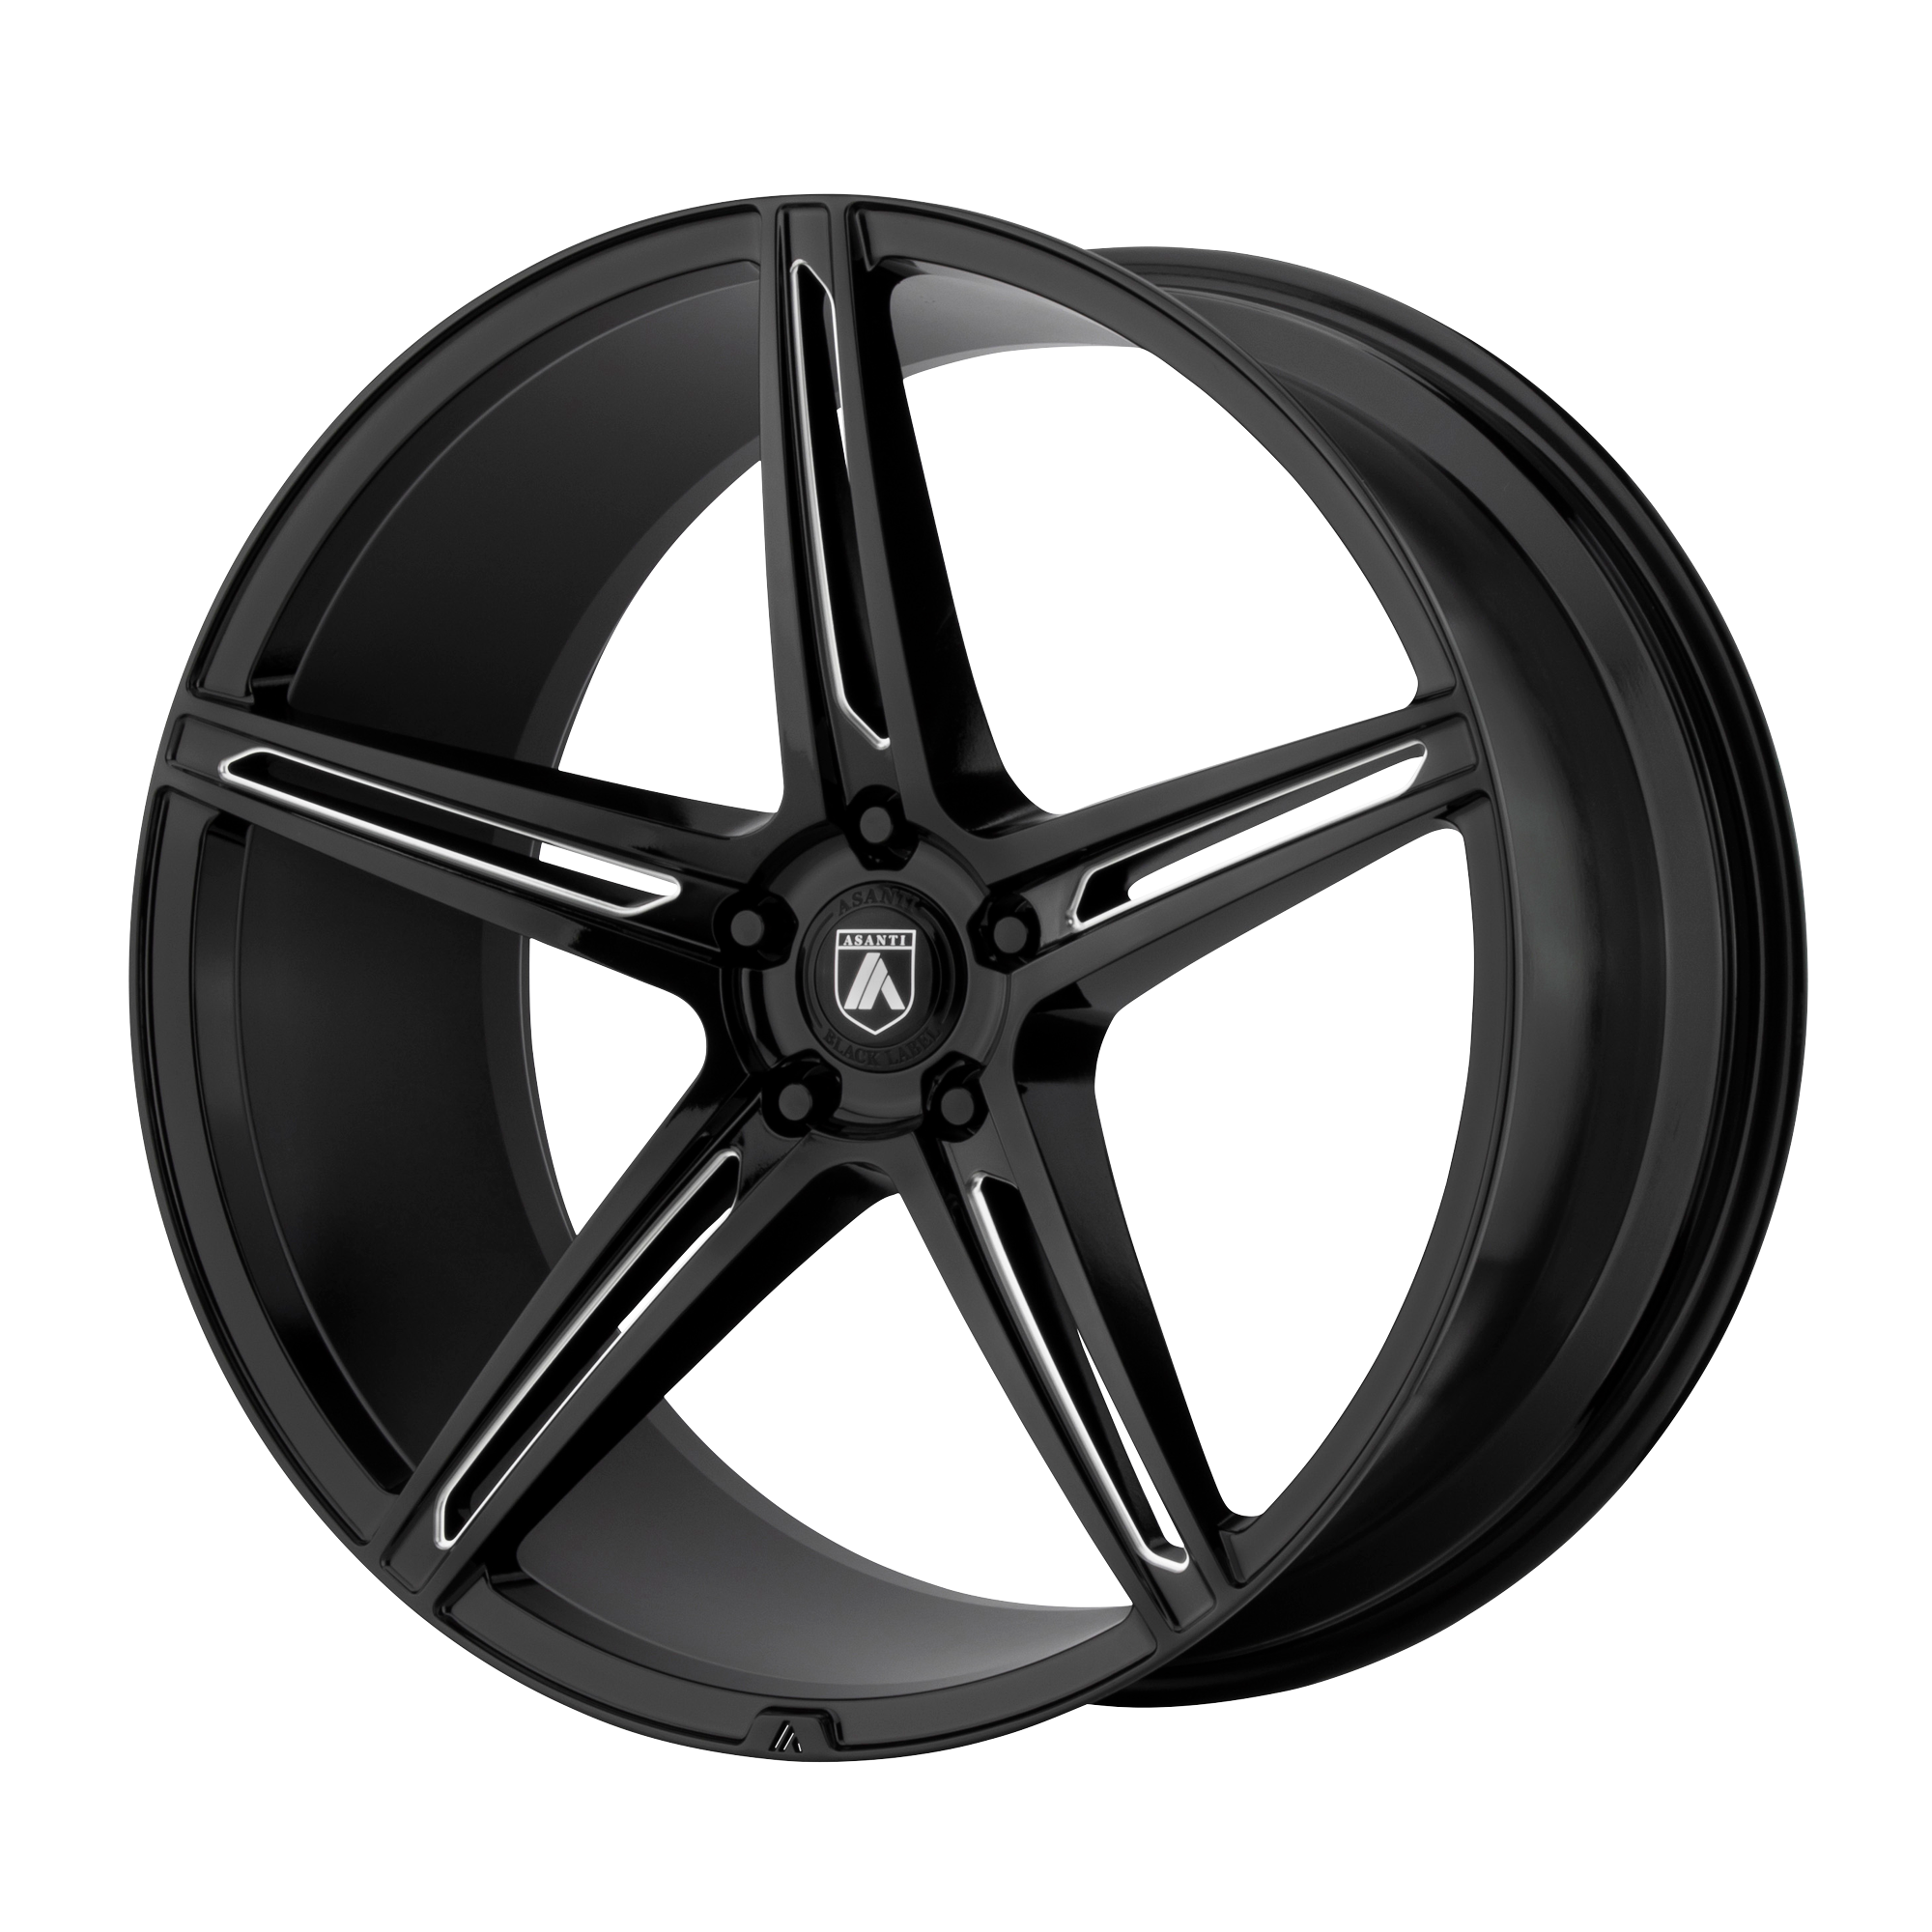 ALPHA 5 20x8.5 5x112.00 GLOSS BLACK MILLED (38 mm) - Tires and Engine Performance